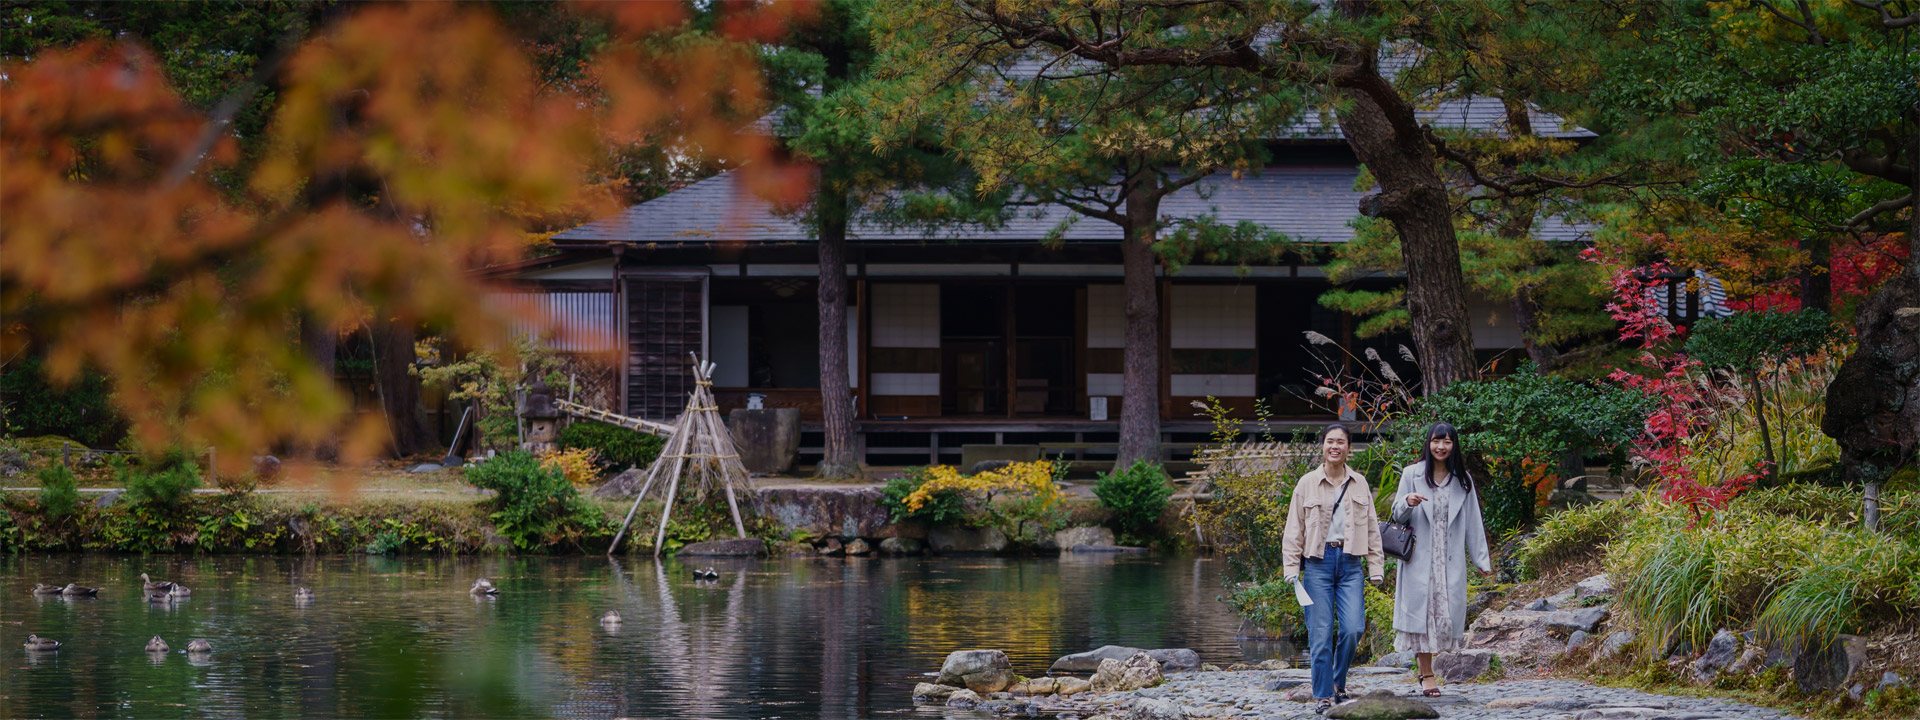 A trip that will allow you to experience seasonal picturesque scenery and Japanese culture